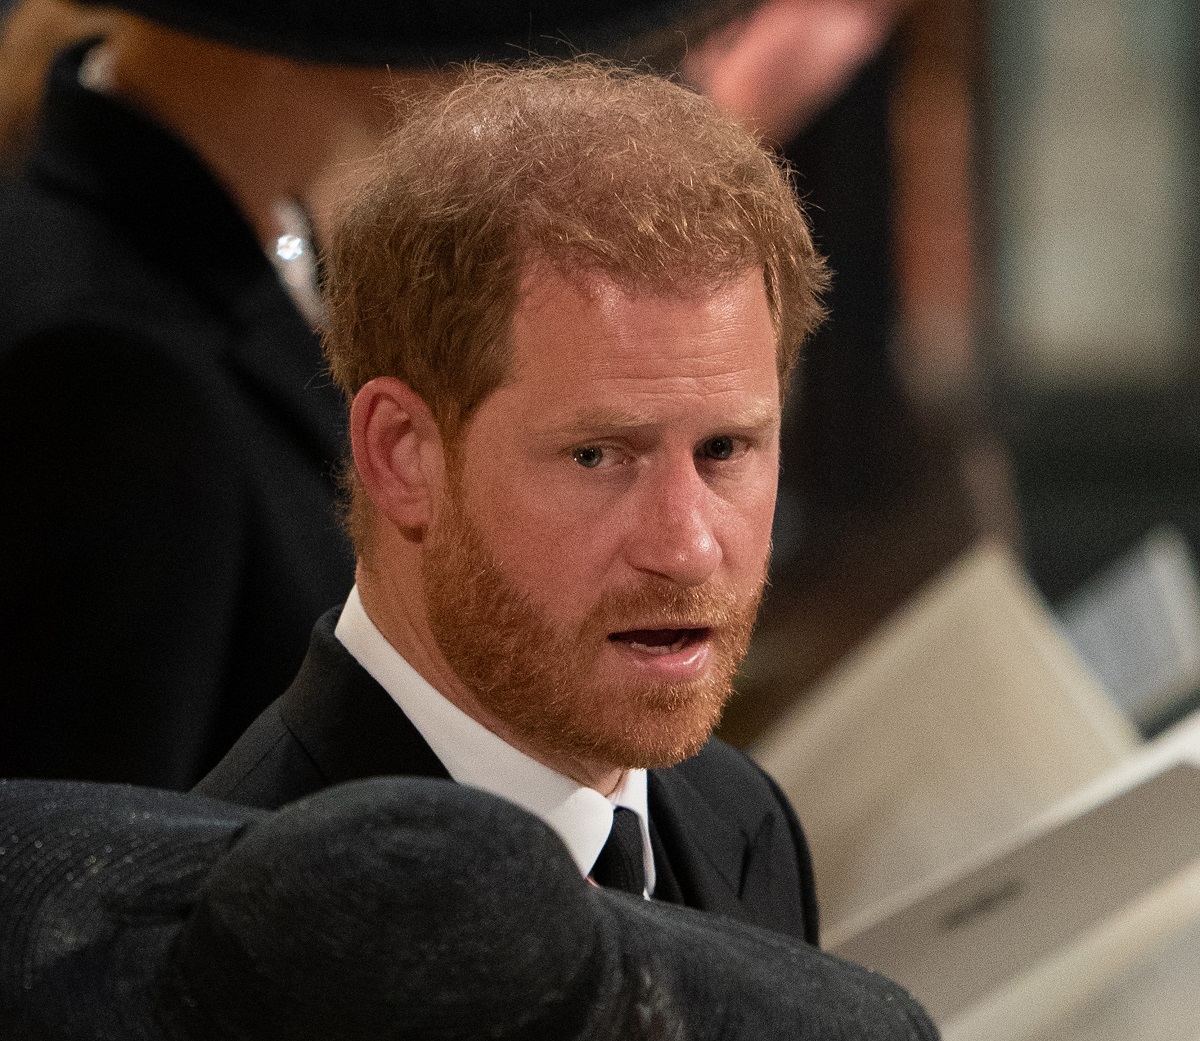 Prince Harry seated during Queen Elizabeth II's committal service at St George's Chapel in Windsor Castle